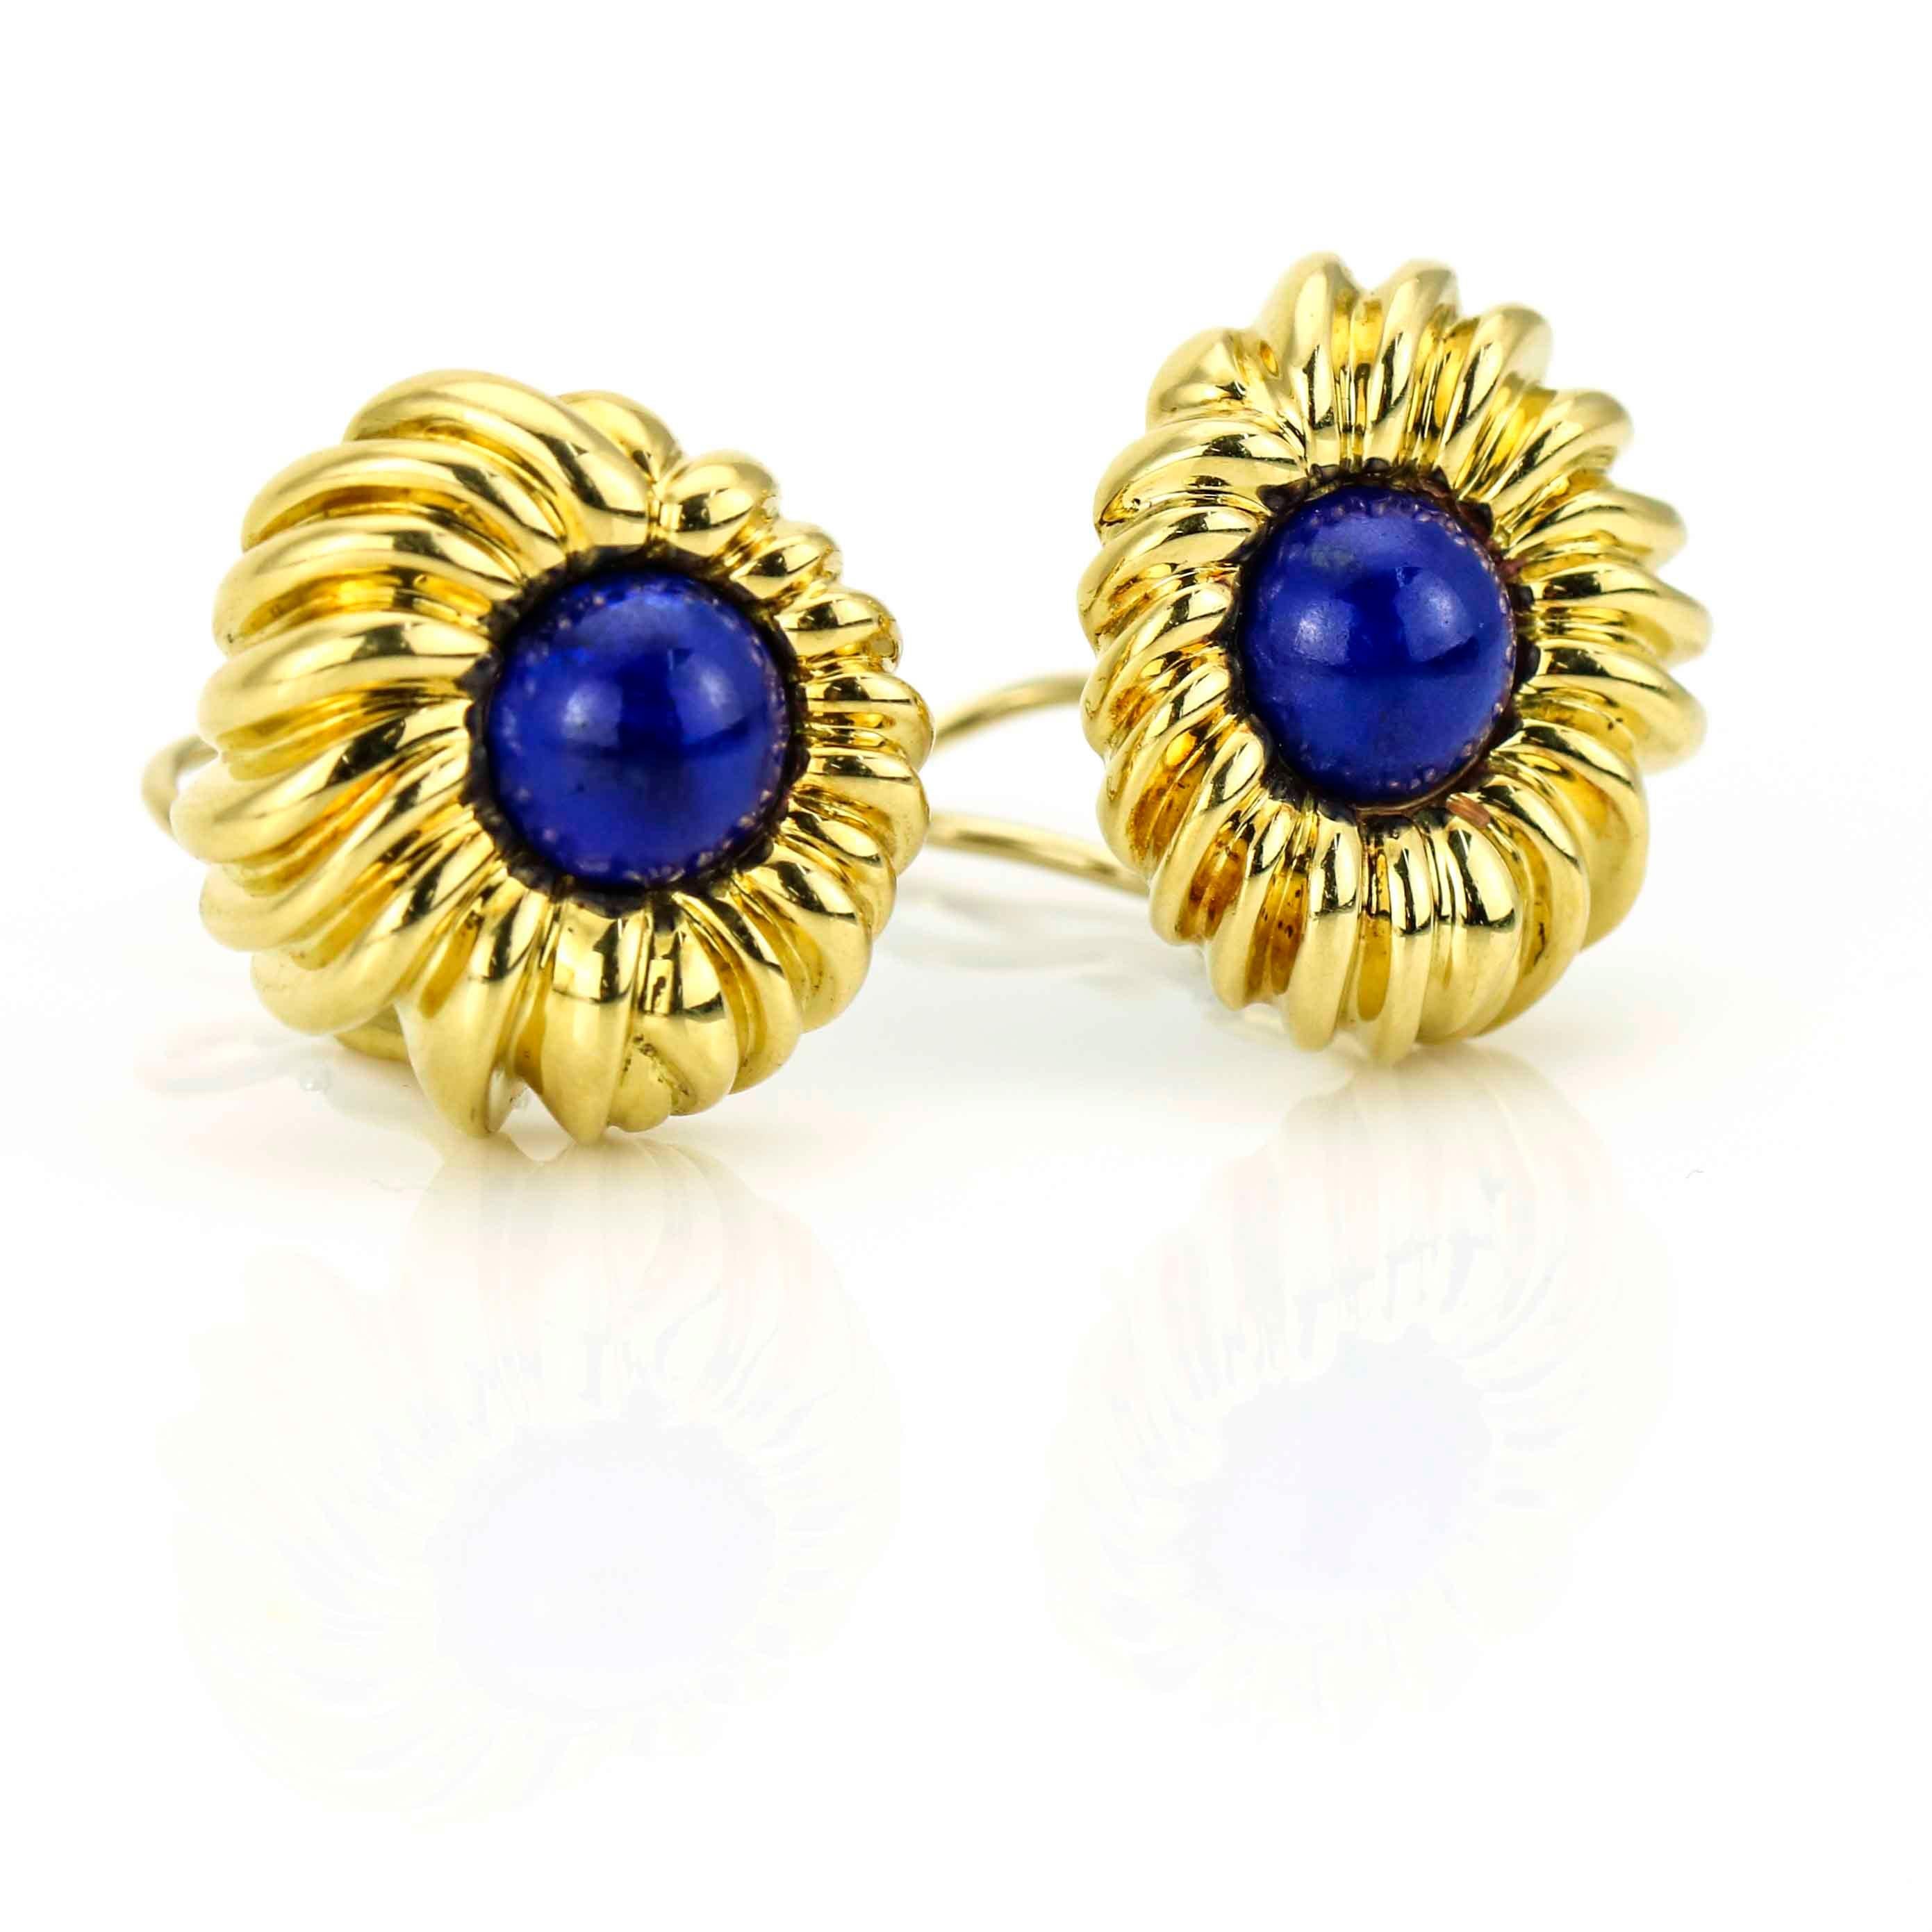 Lapis Lazuli retro earrings by Tiffany & Co. crafted in 18 karat yellow gold. Omega backs. The cabochon lapis stones have beautiful deep blue color.